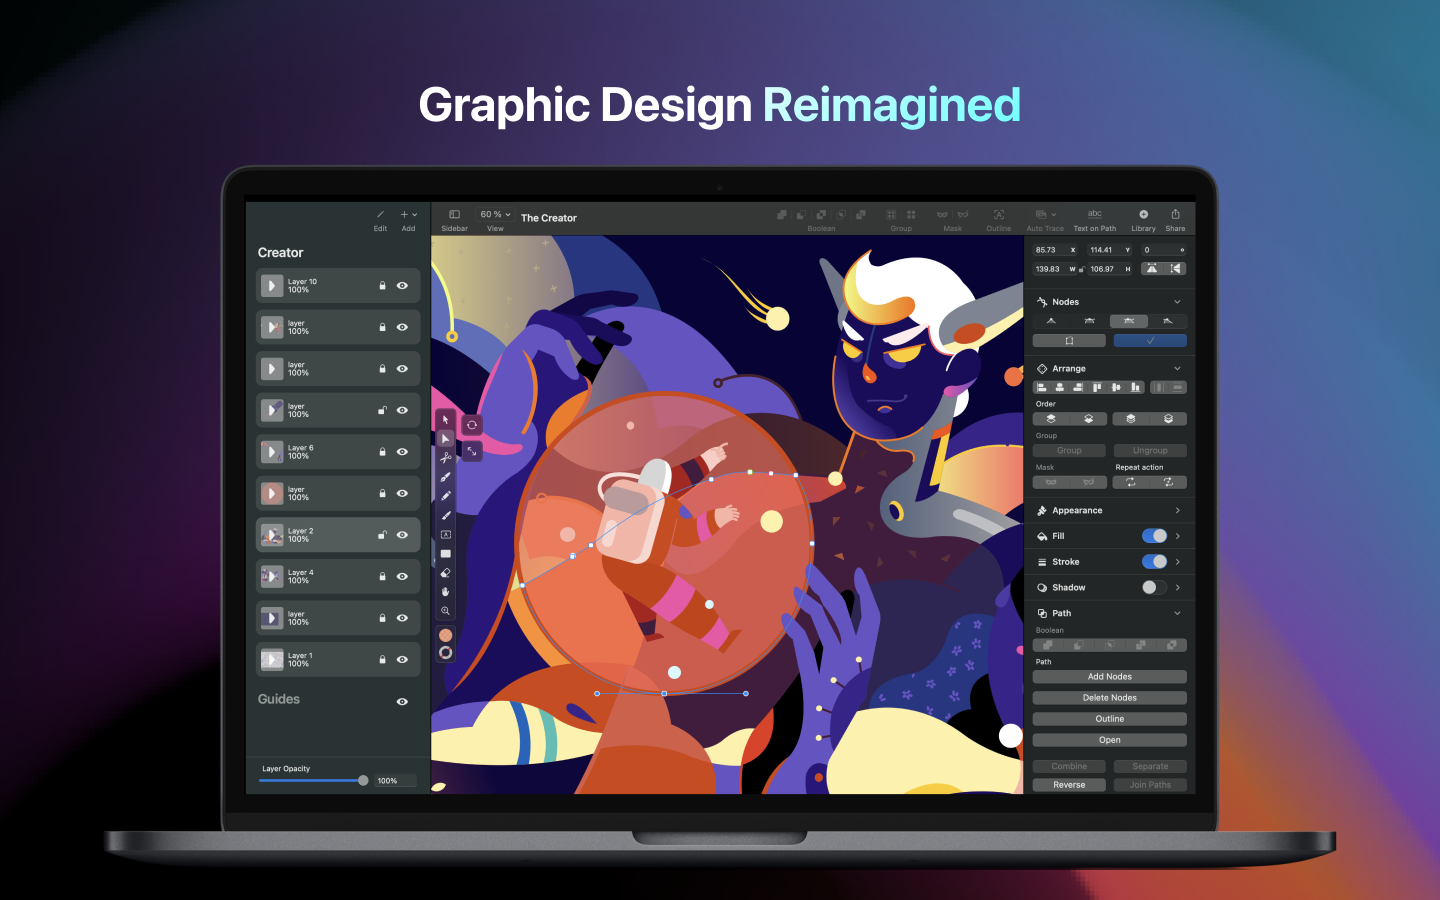 Graphic design reimagined with Vectornator